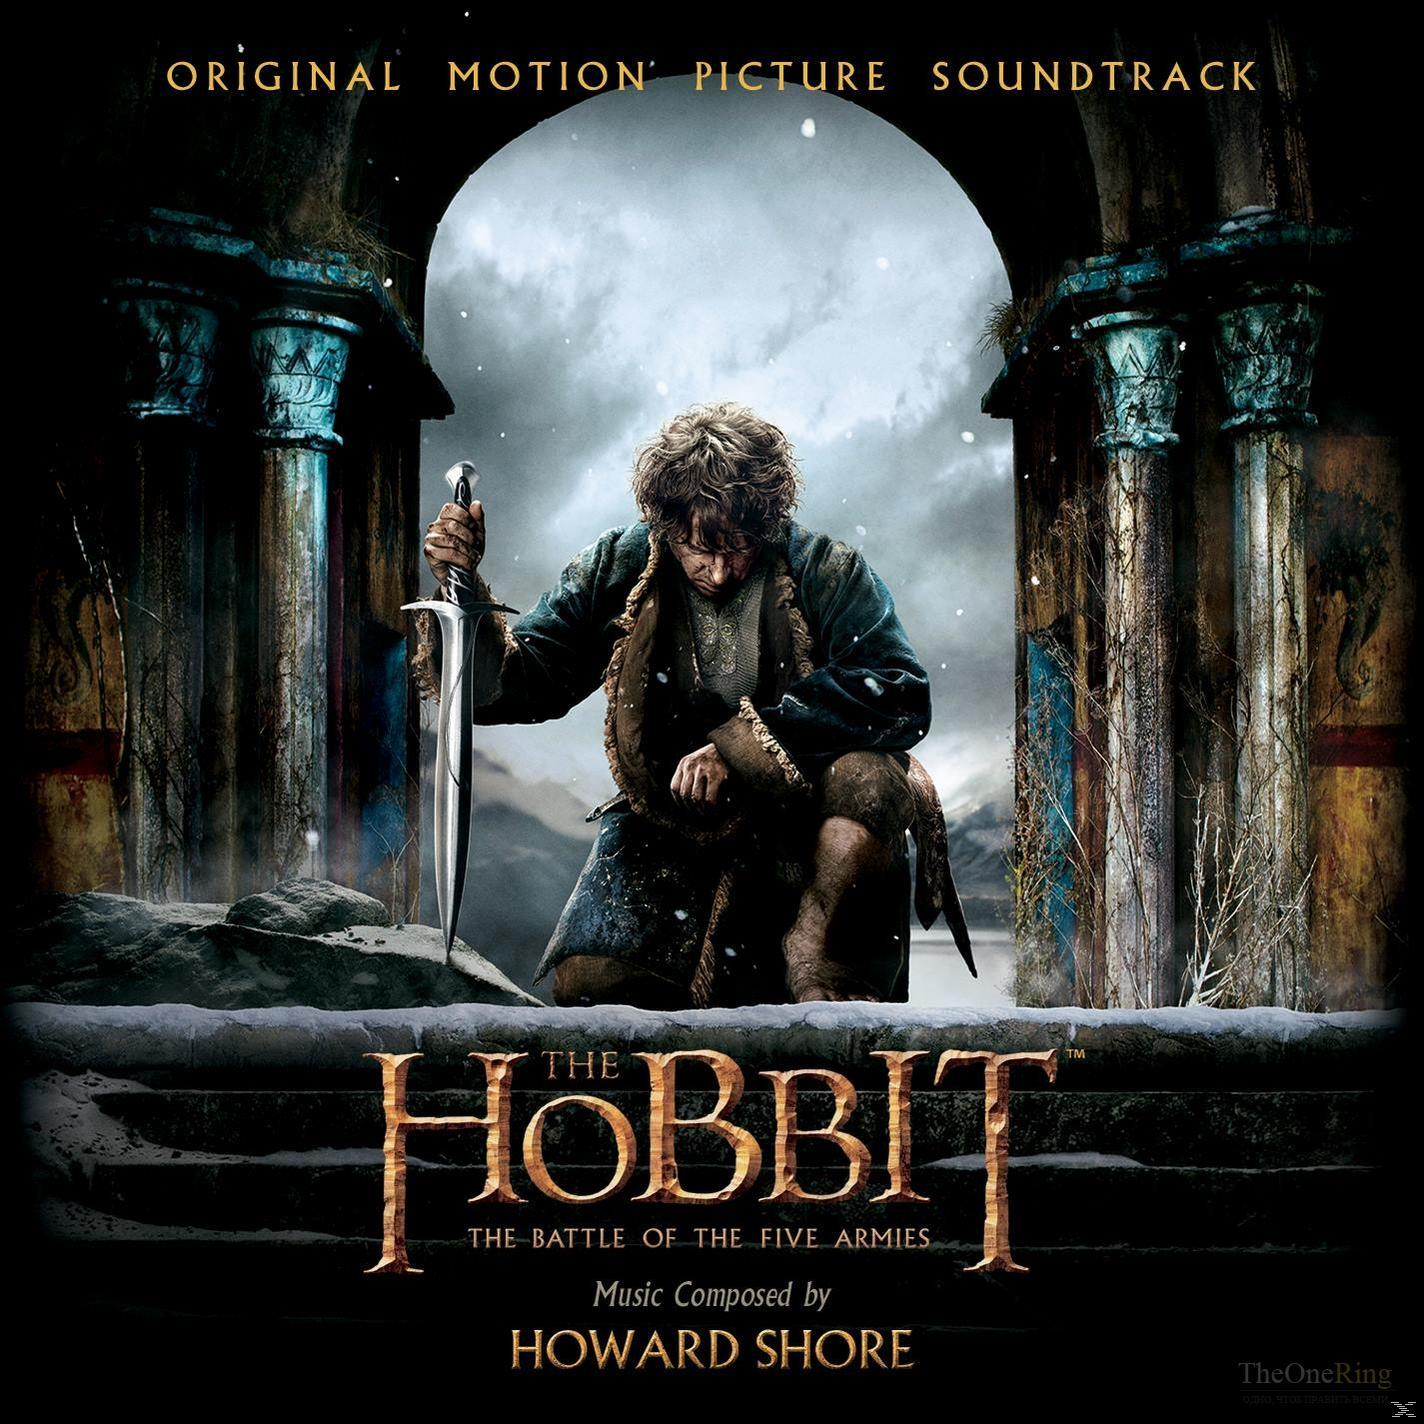 Battle - (CD) Howard Shore Armies The Five Of The - The Hobbit: